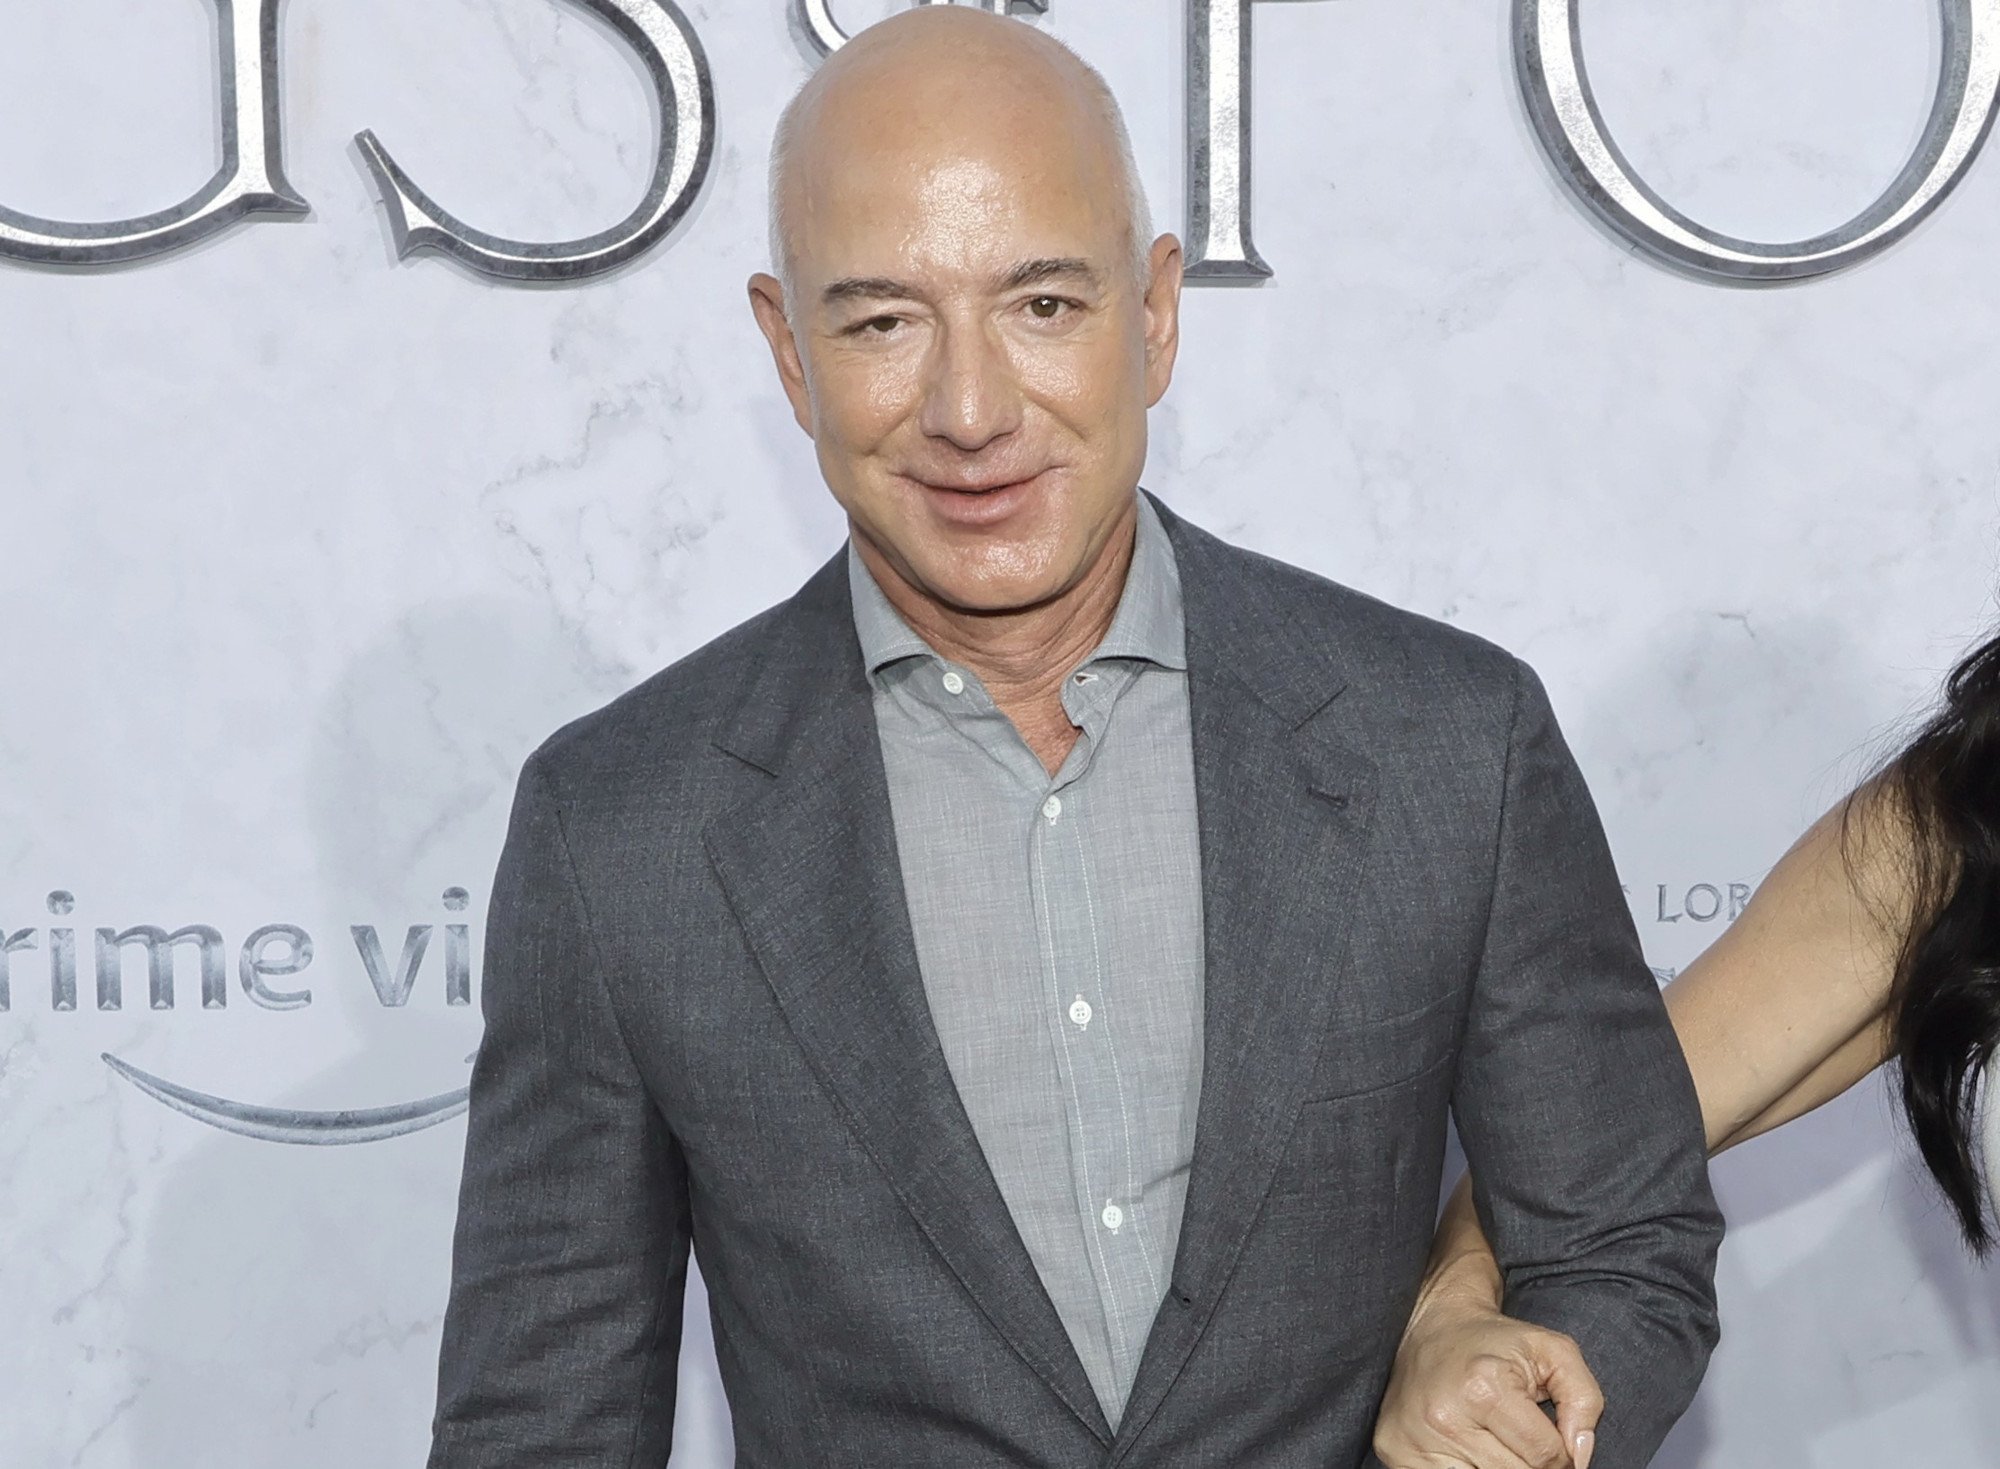 Jeff Bezos at the premiere for 'The Lord of the Rings: The Rings of Power.' He's wearing a grey shirt, darker grey jacket, and holding someone's arm.